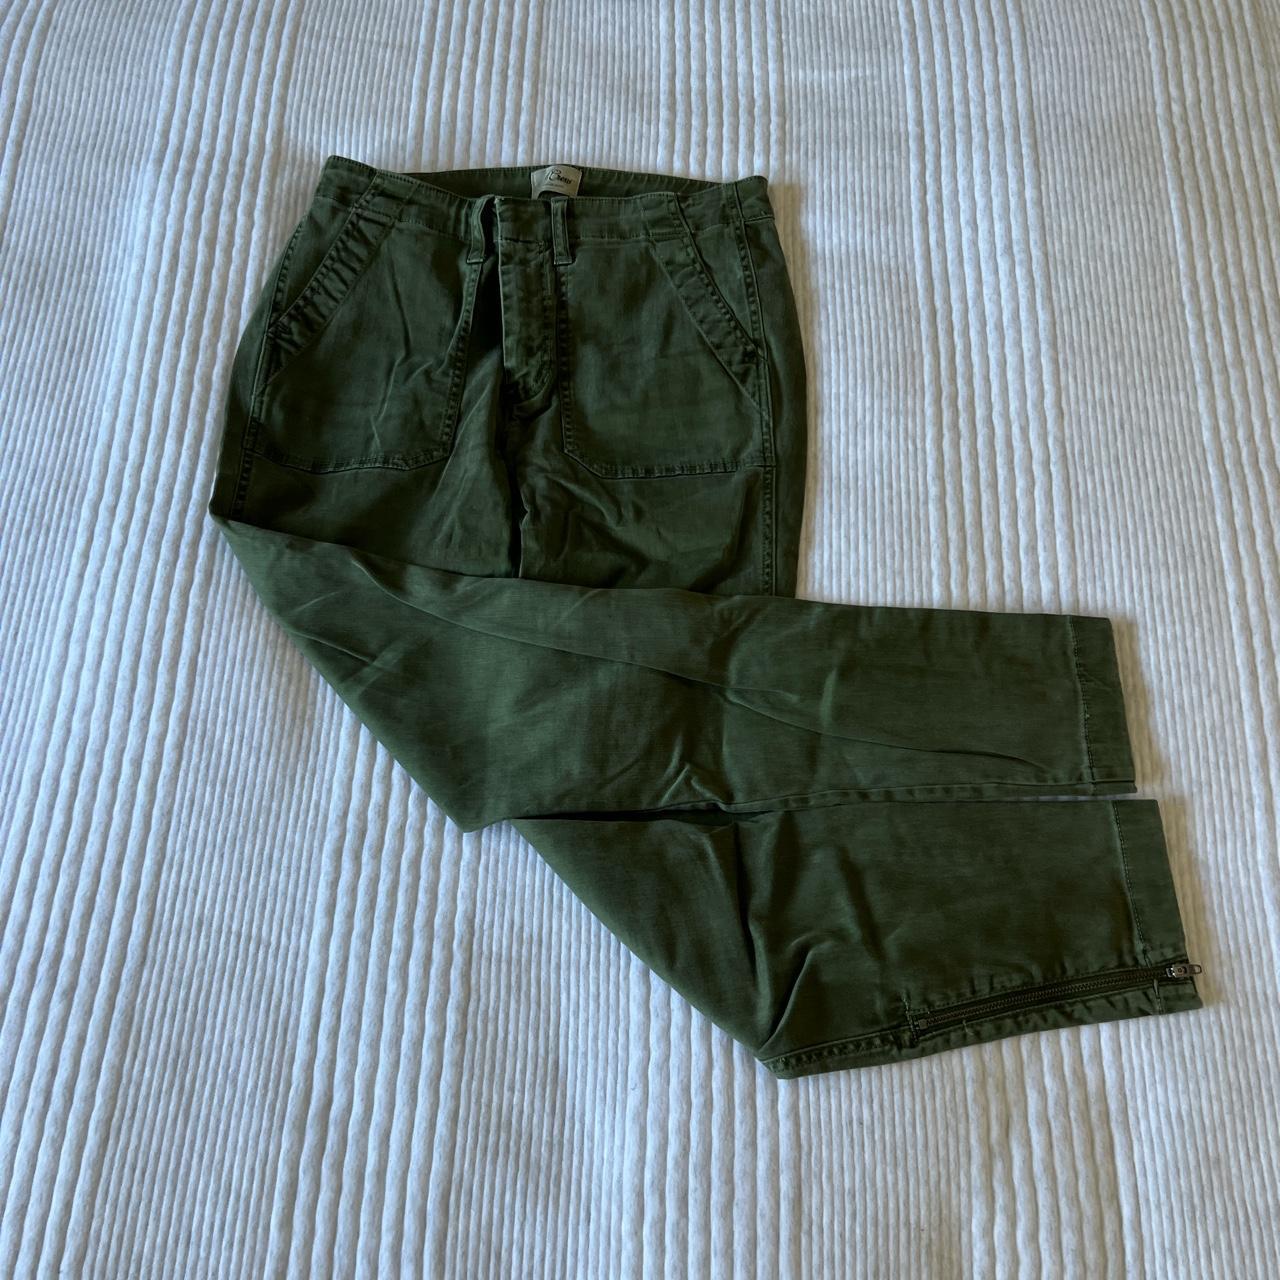 J.Crew Army Pants - Size 27. Skinny fit, with a... - Depop